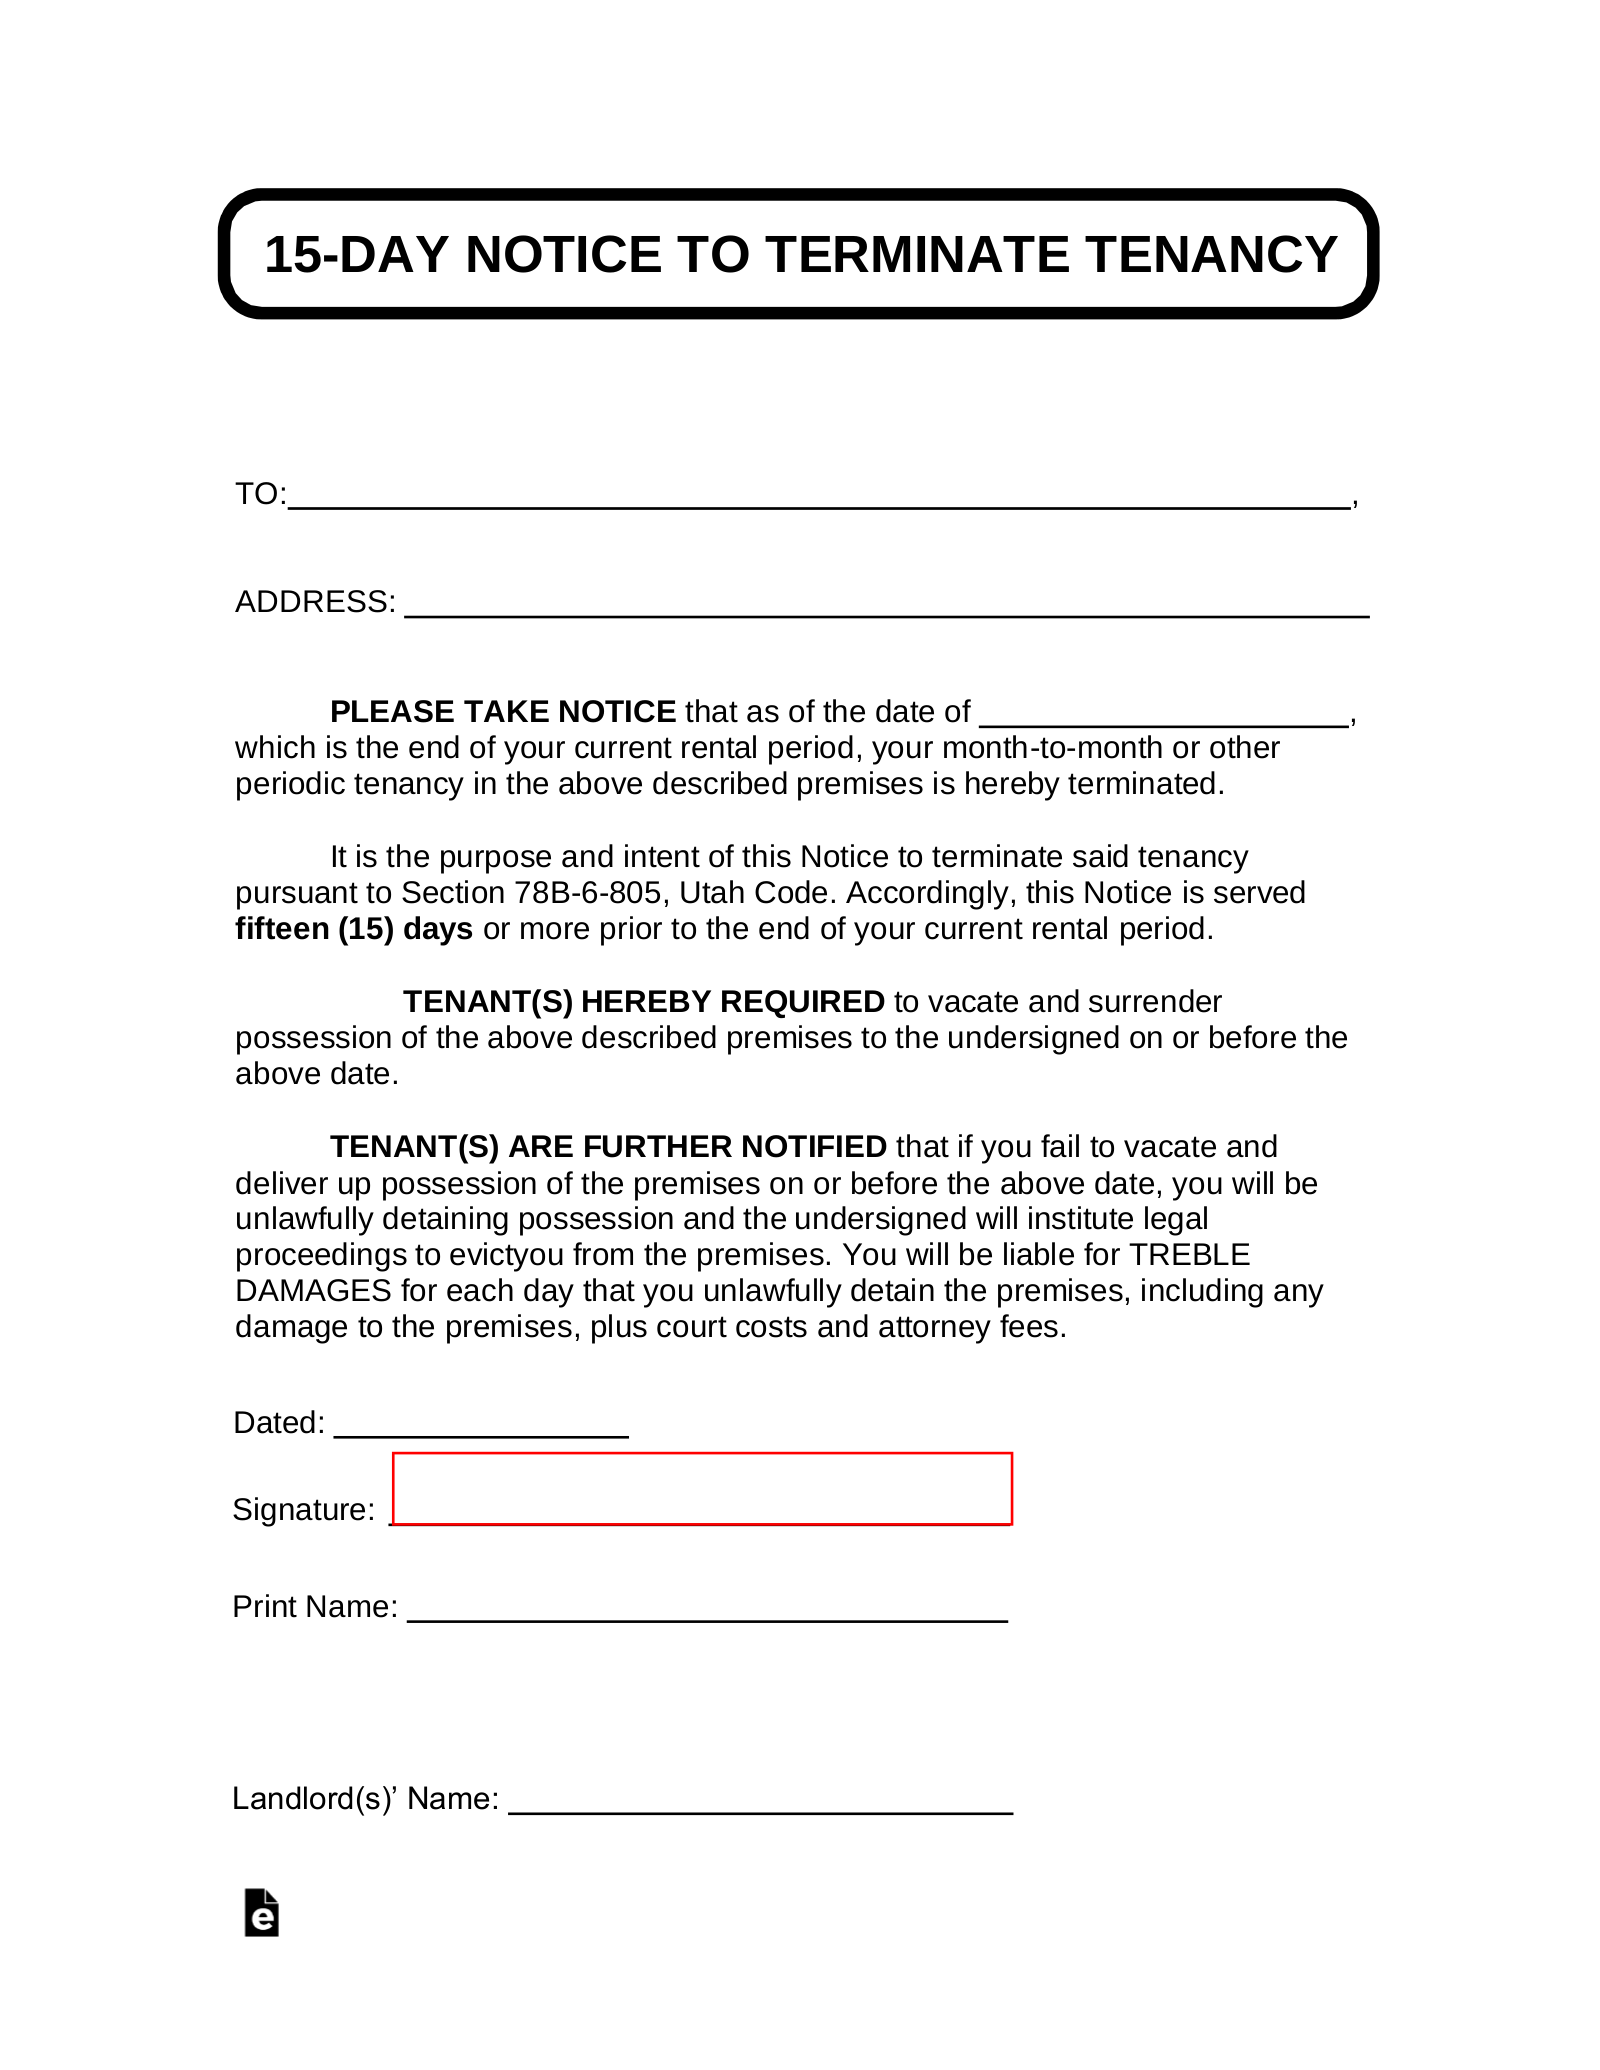 Utah Lease Termination Letter Form | 15-Day Notice